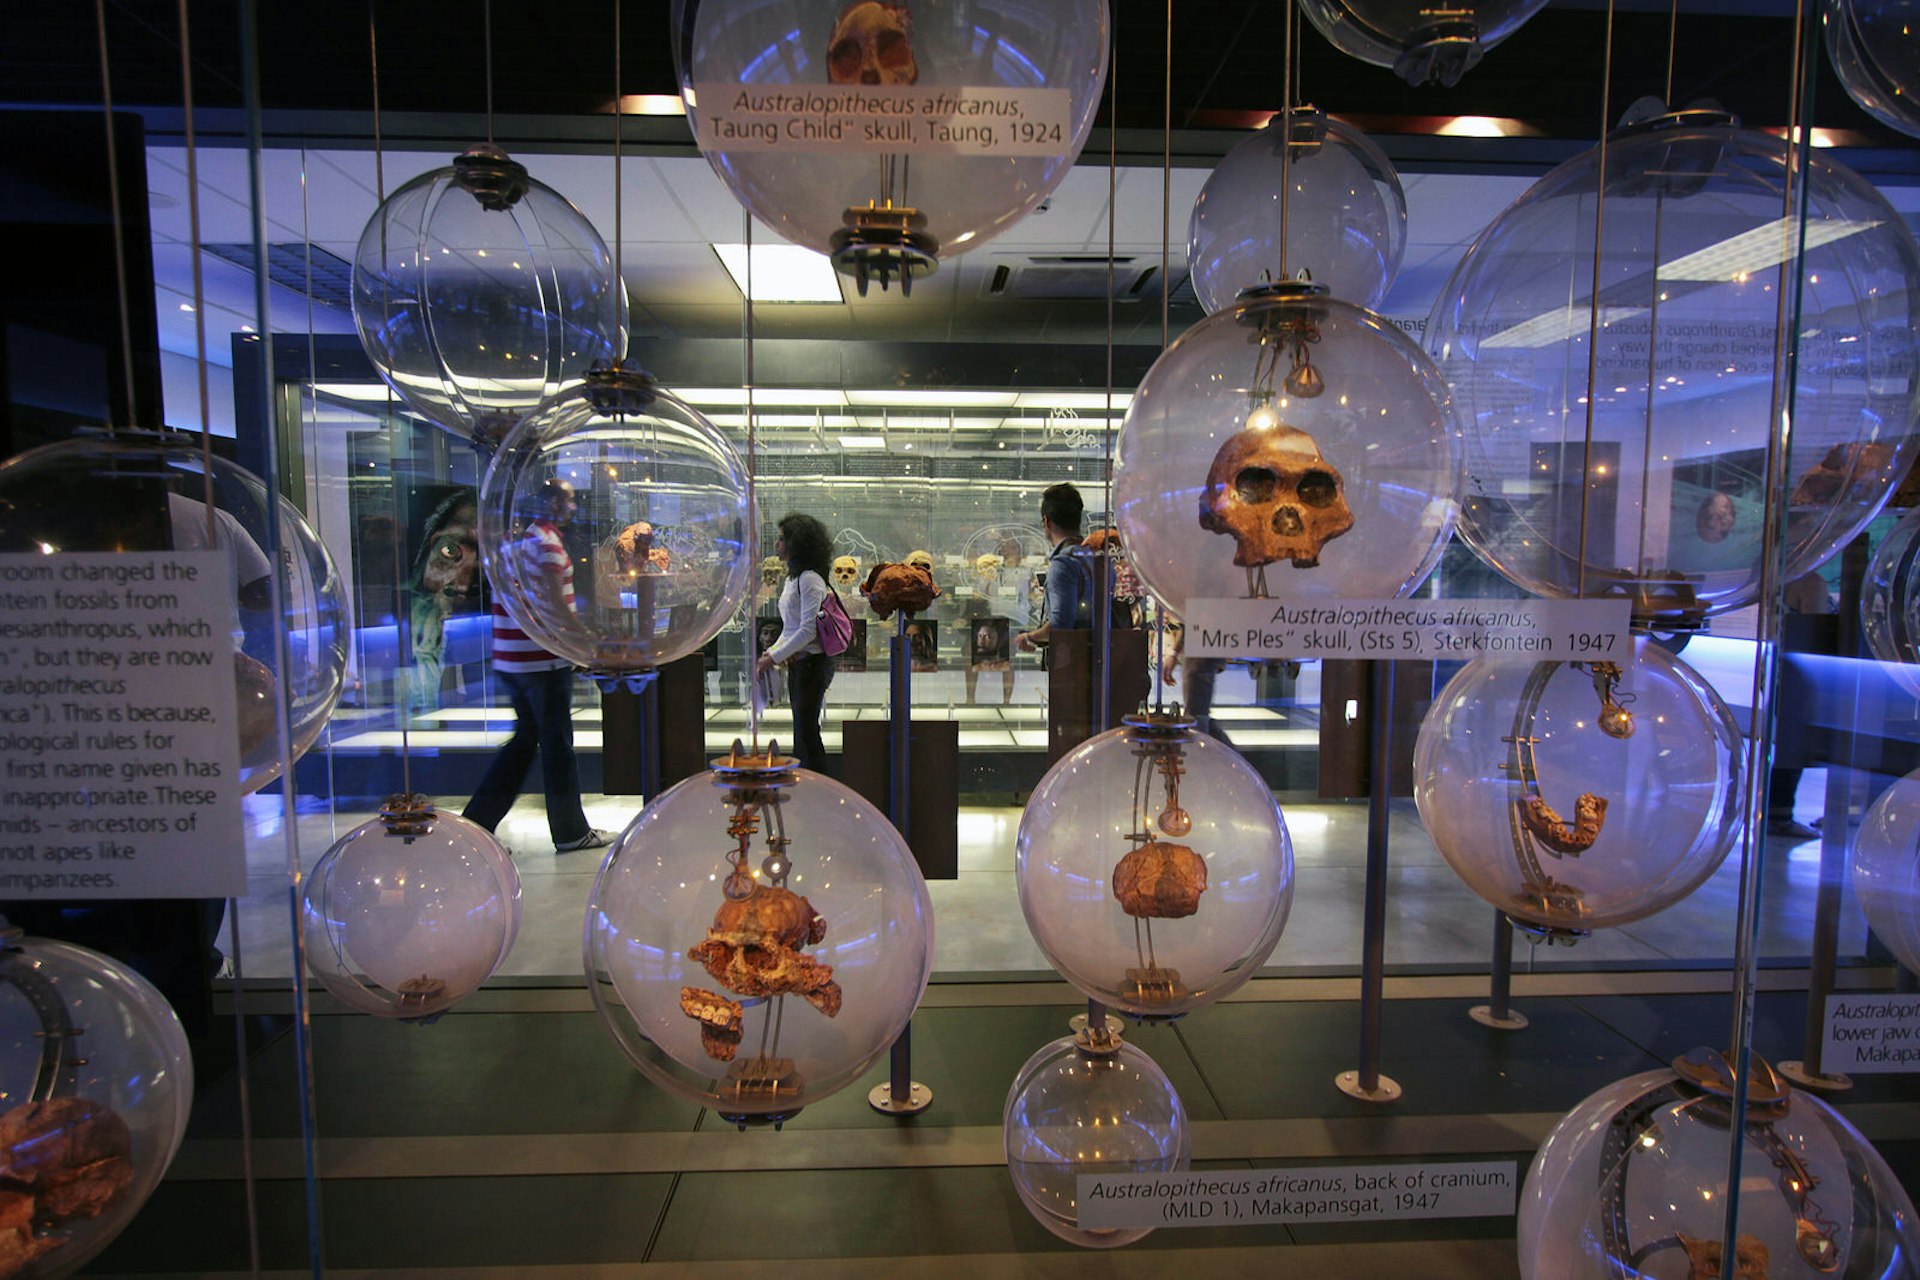 Glass spheres hang from the ceiling, each containing skulls or bones from ancient humanid species; people walk behind looking at other artefacts